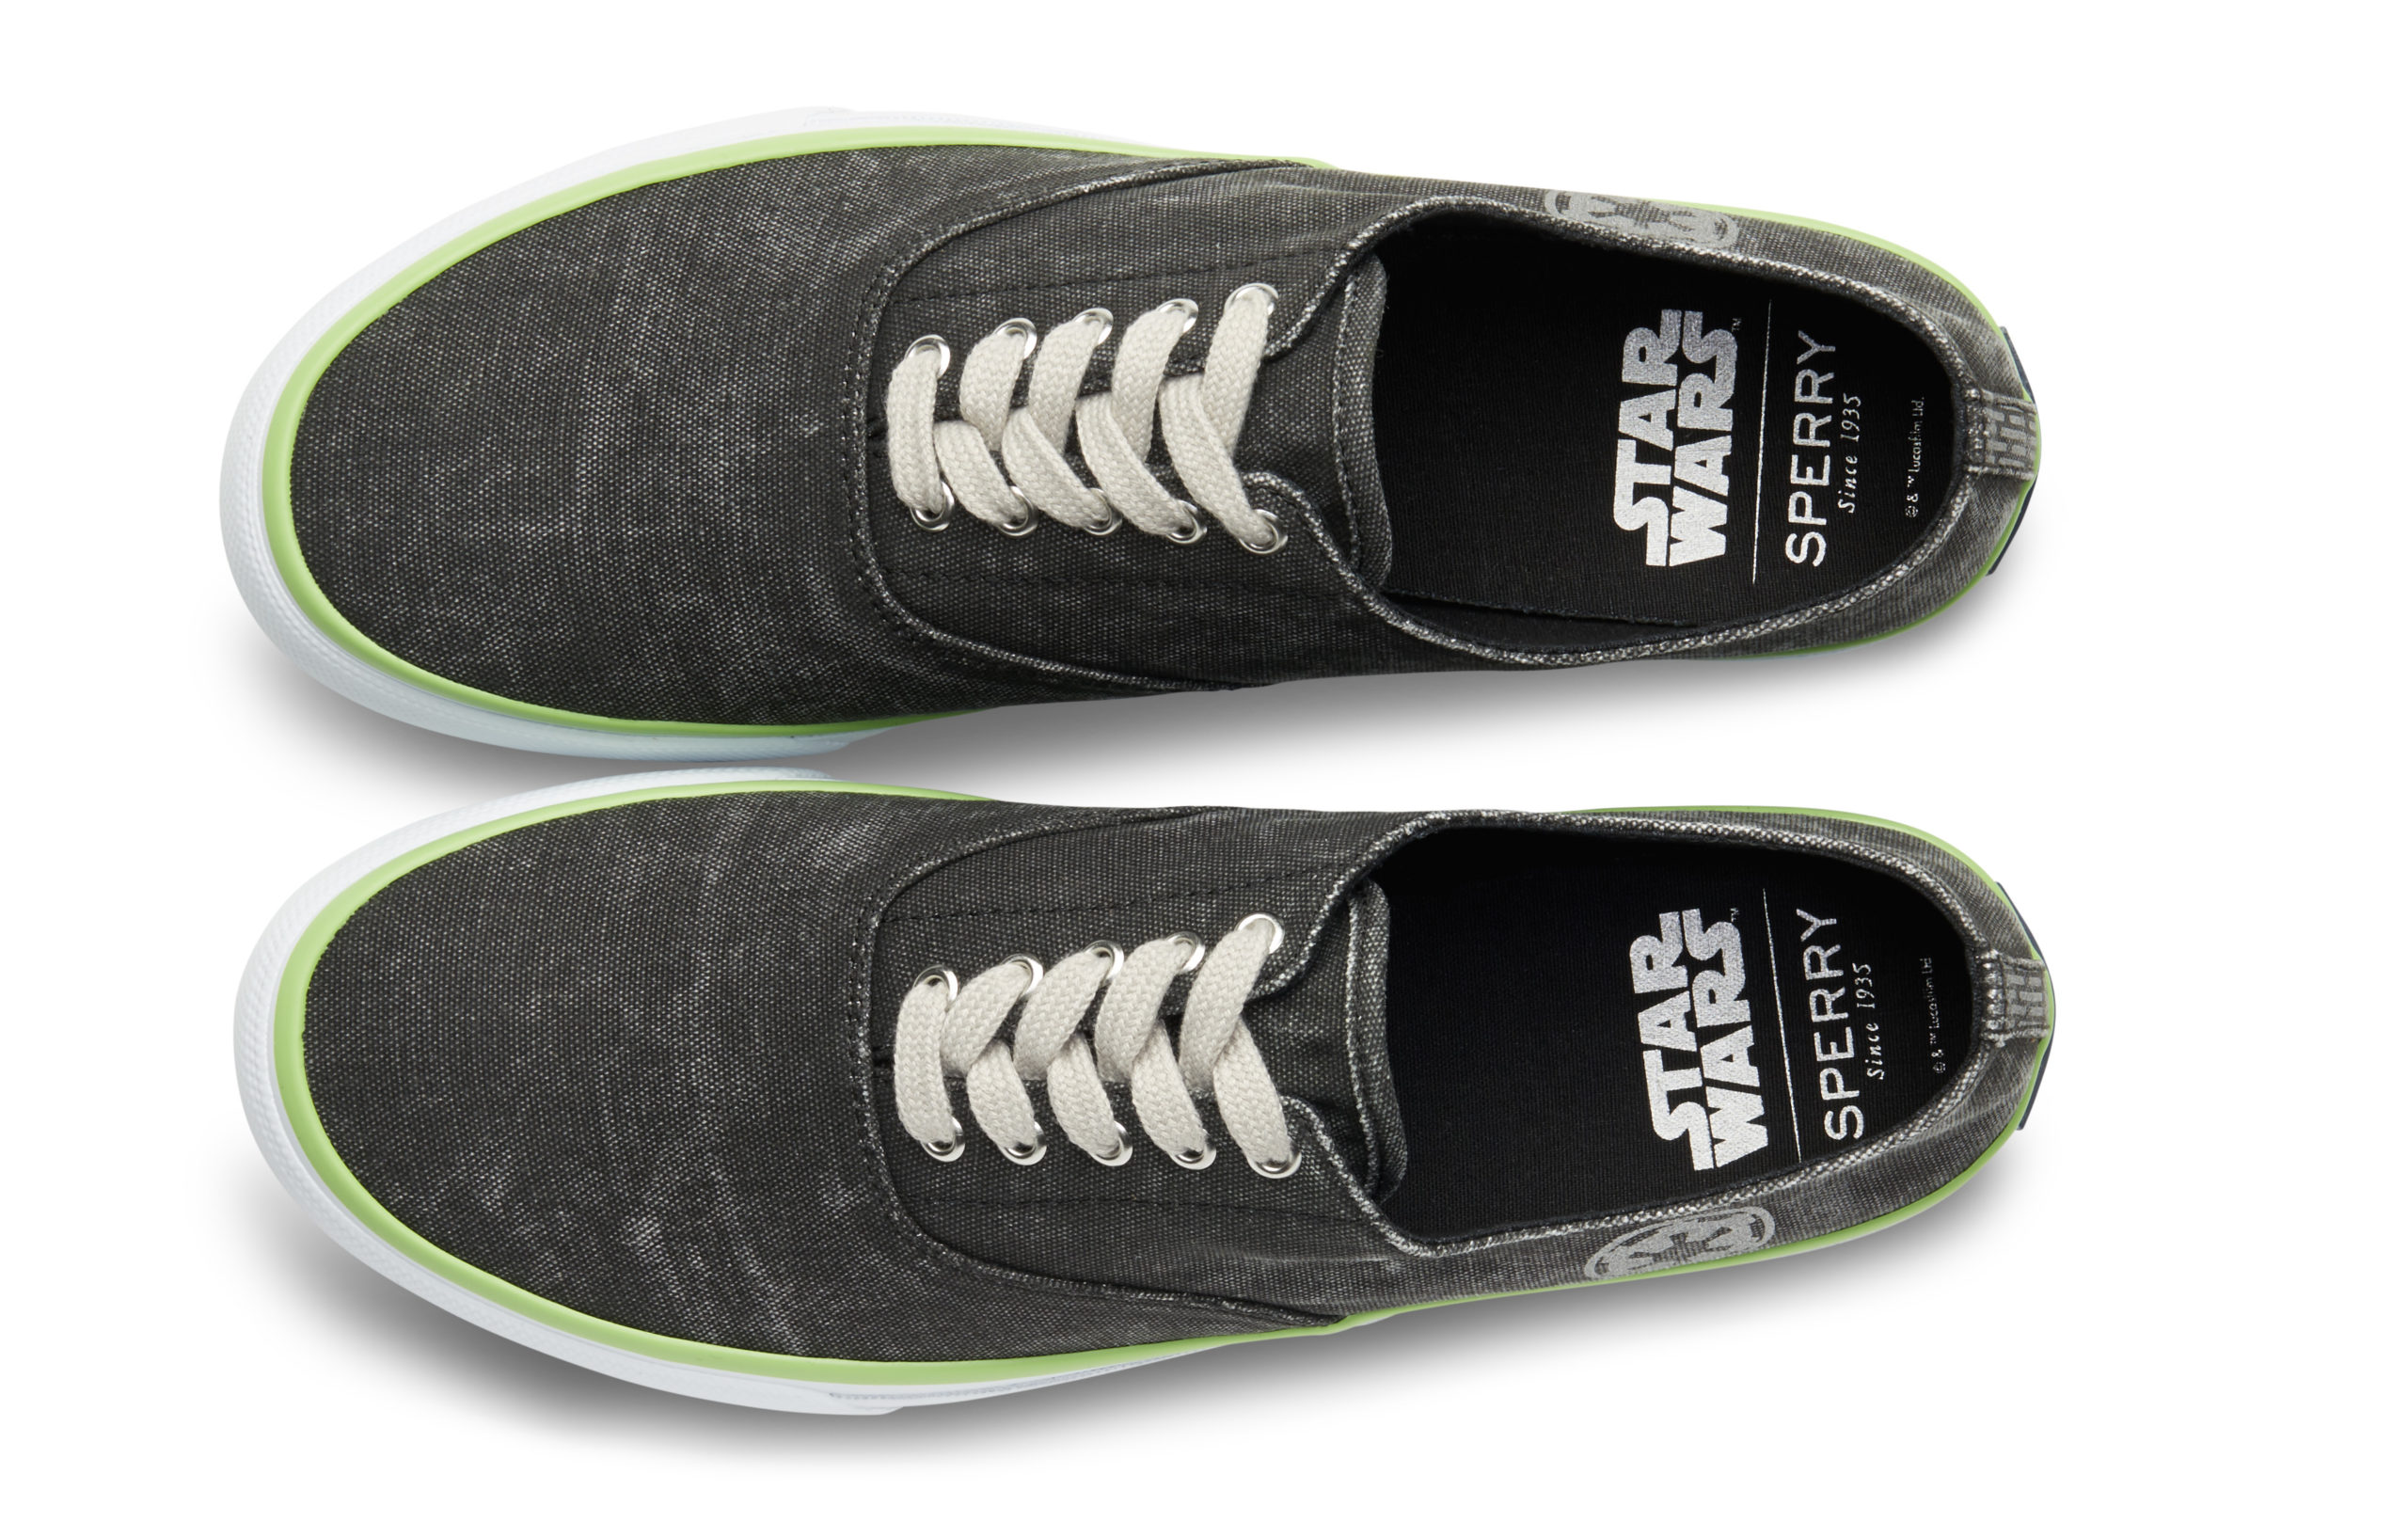 Um, These Star Wars Sneakers Are Awesome